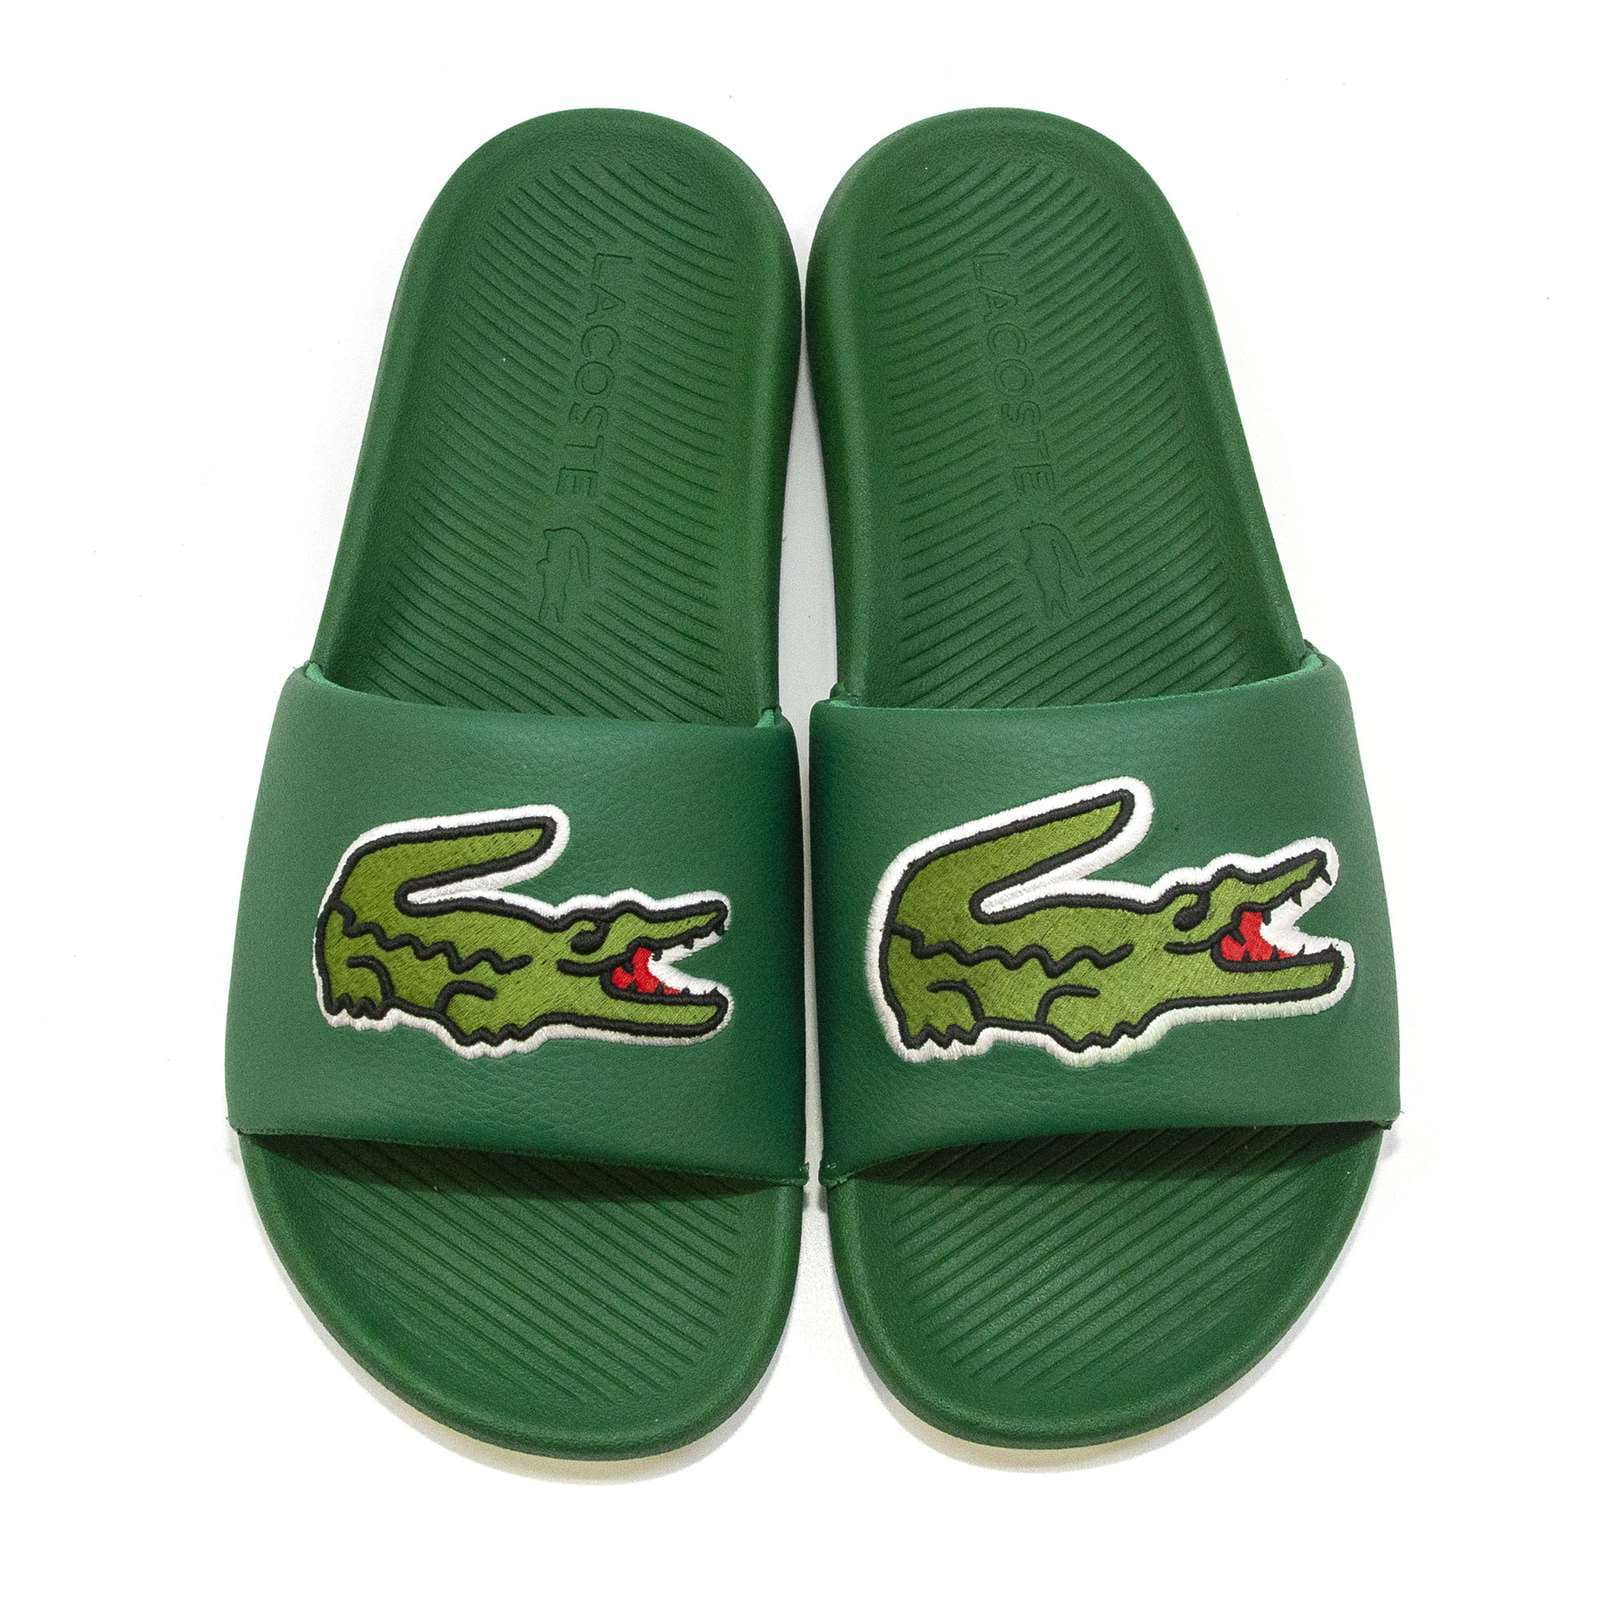 Lacoste Slippers in Surulere - Shoes, Brothersman Luxury | Jiji.ng-happymobile.vn